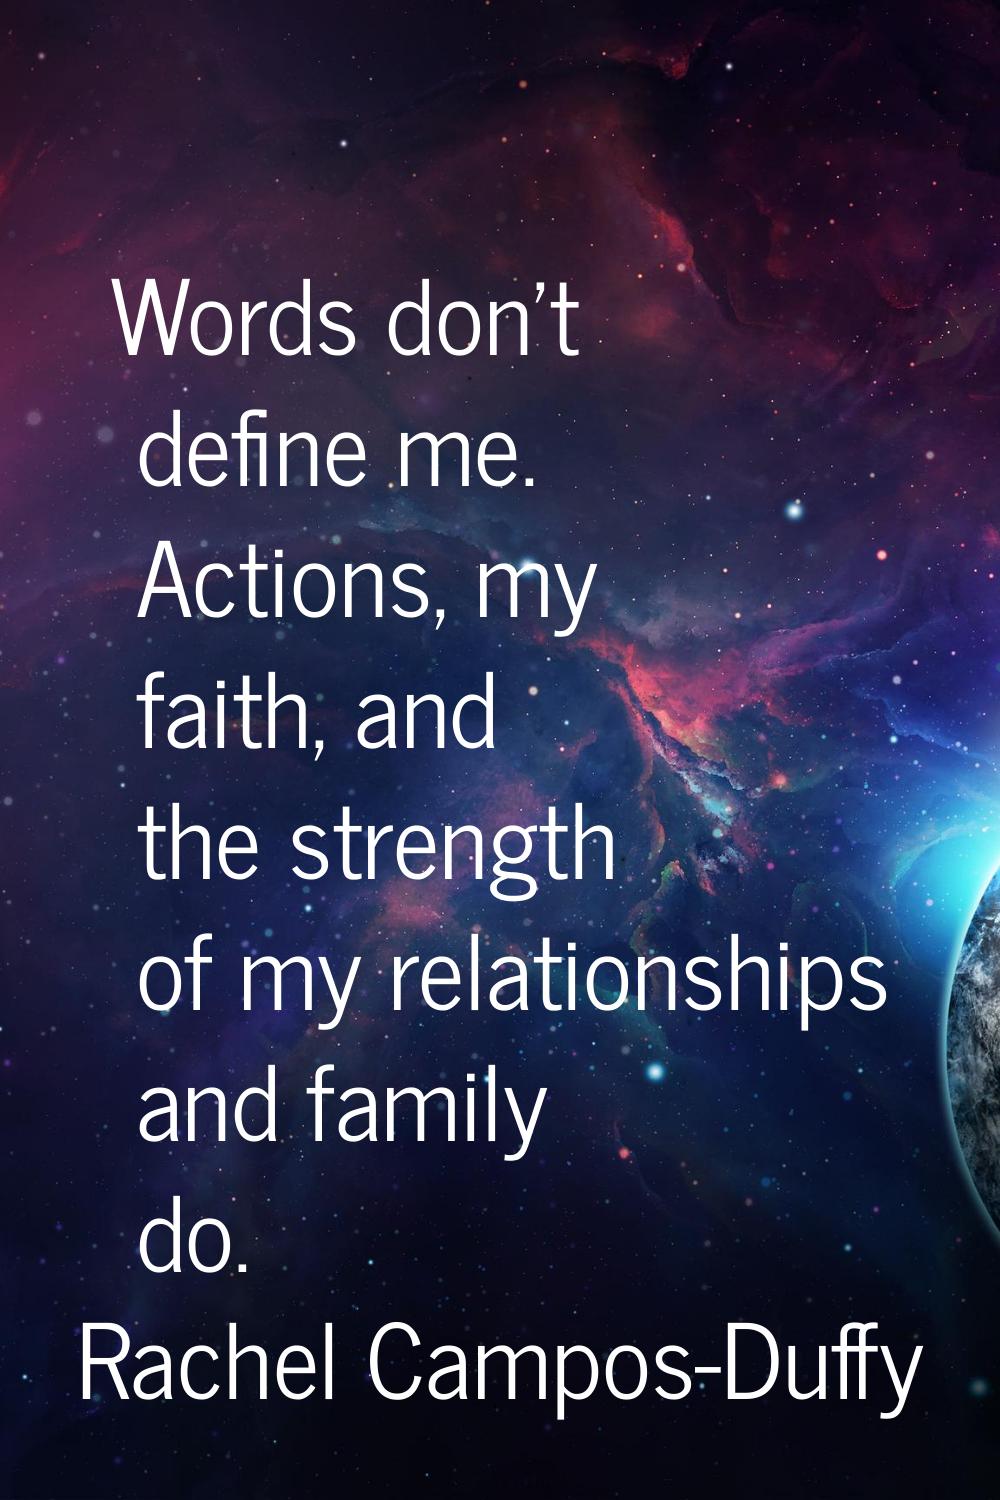 Words don't define me. Actions, my faith, and the strength of my relationships and family do.